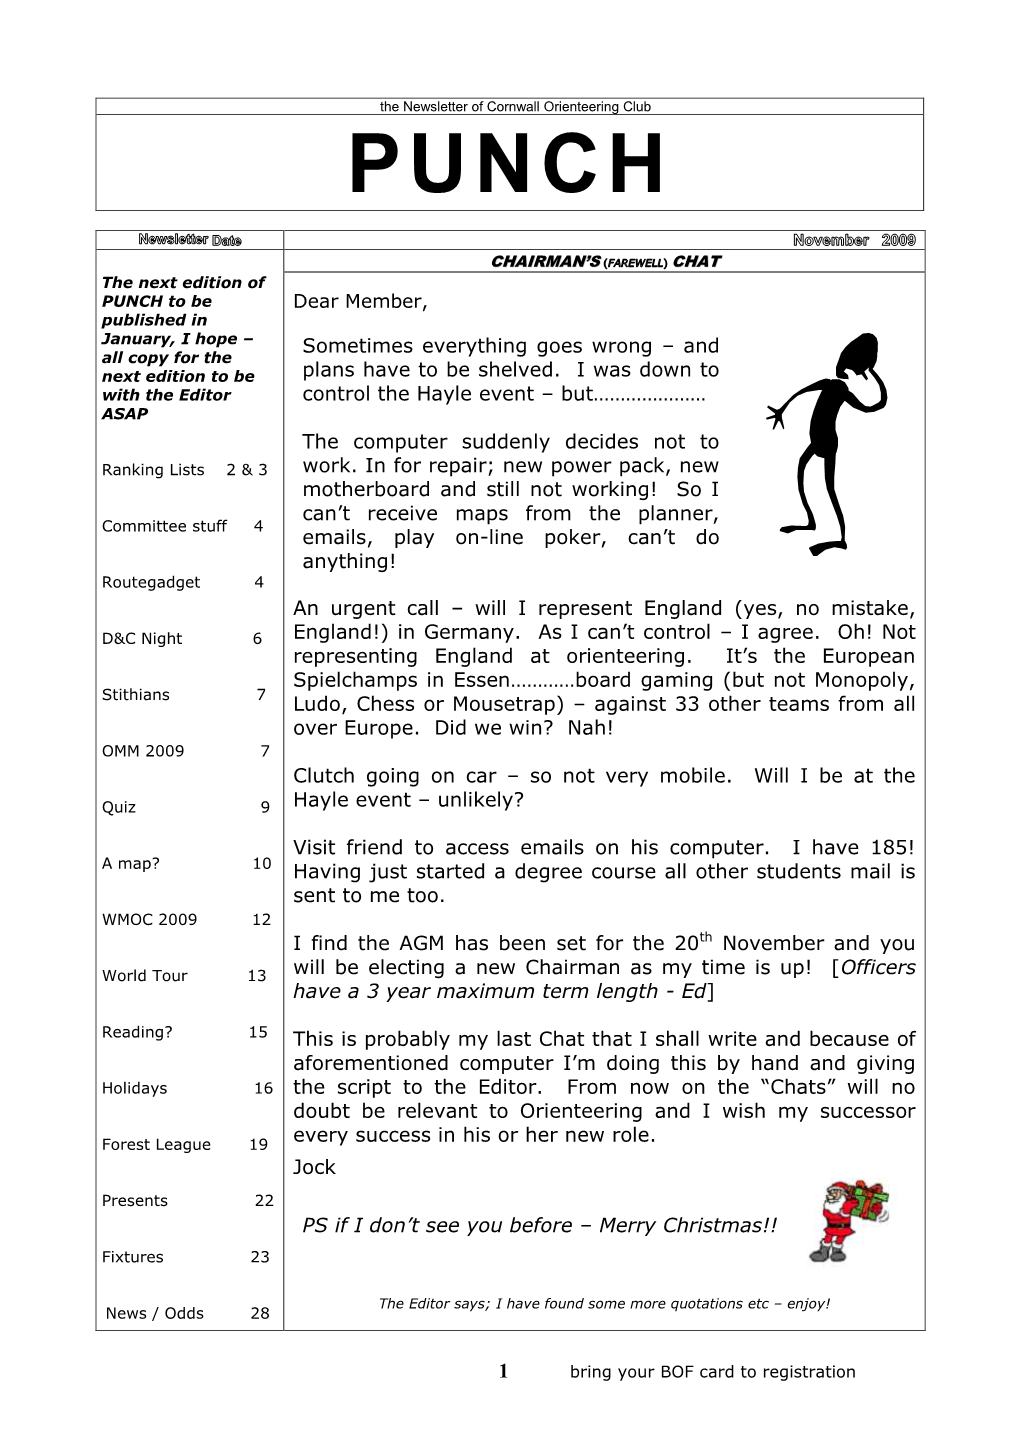 The Newsletter of Cornwall Orienteering Club PUNCH